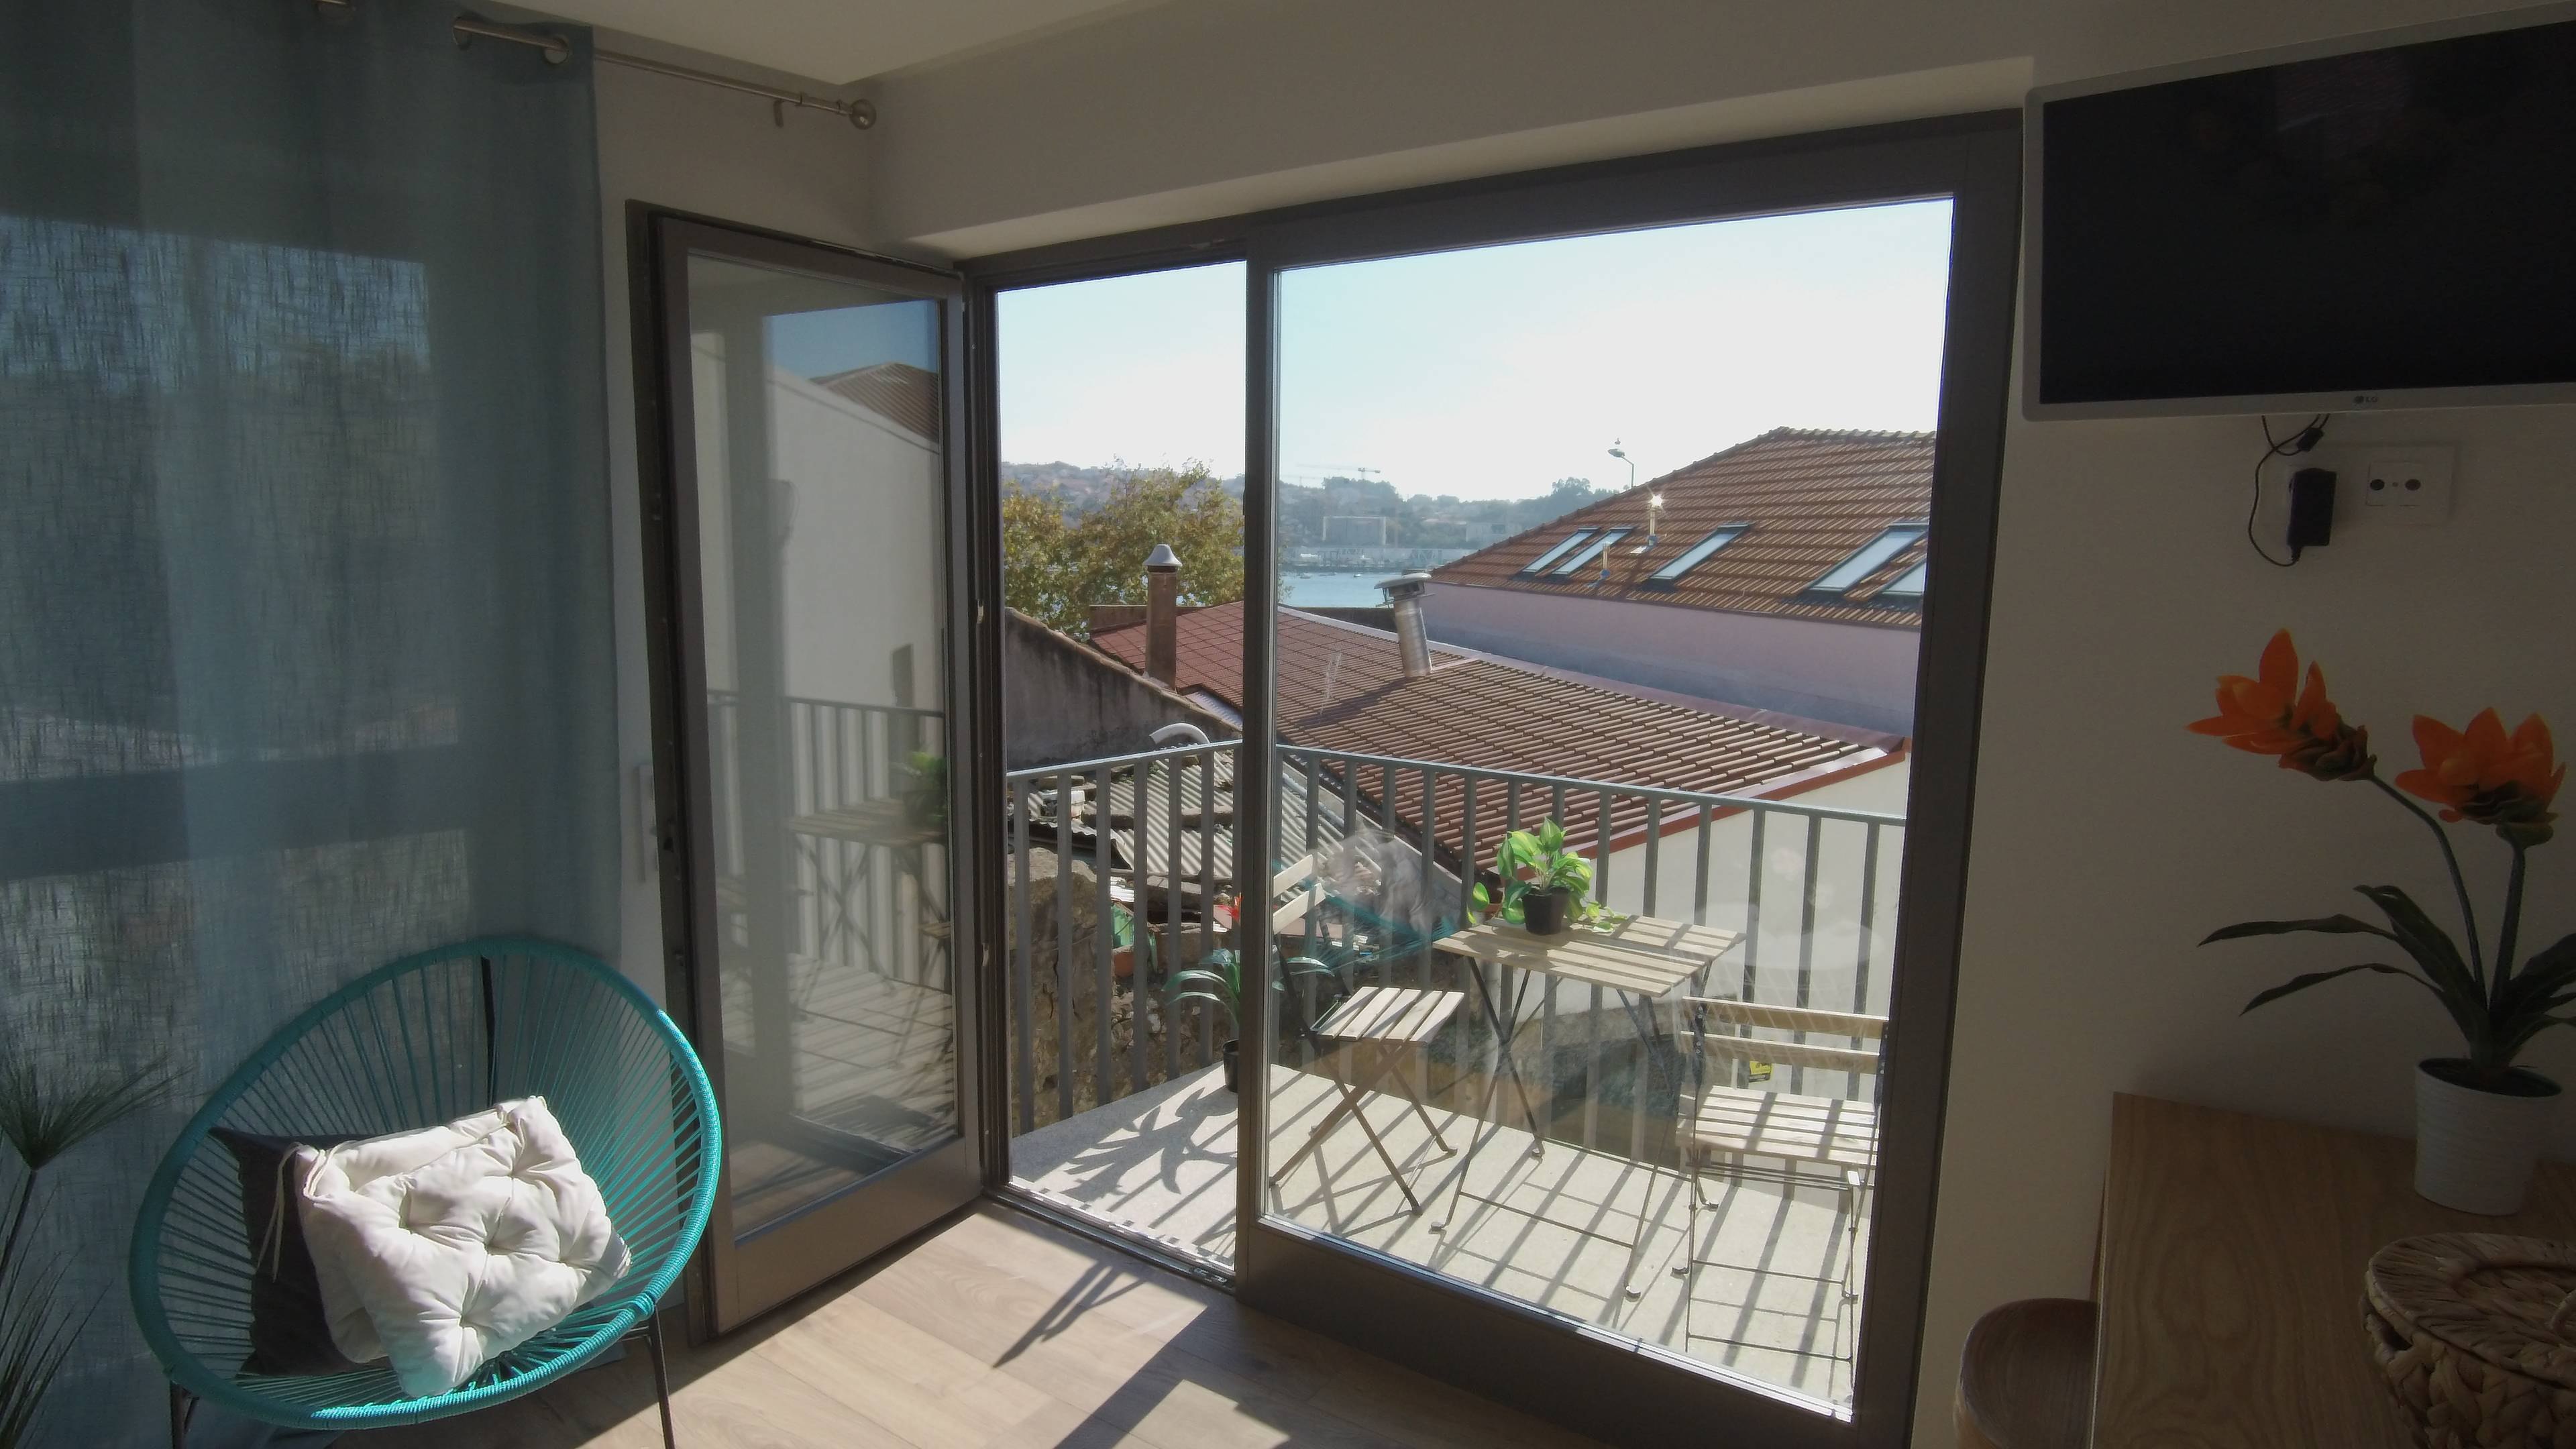 Amazing 1+1 Bedroom Duplex Apartment in the most exclusive parish of Porto, Portugal with a great yield per year